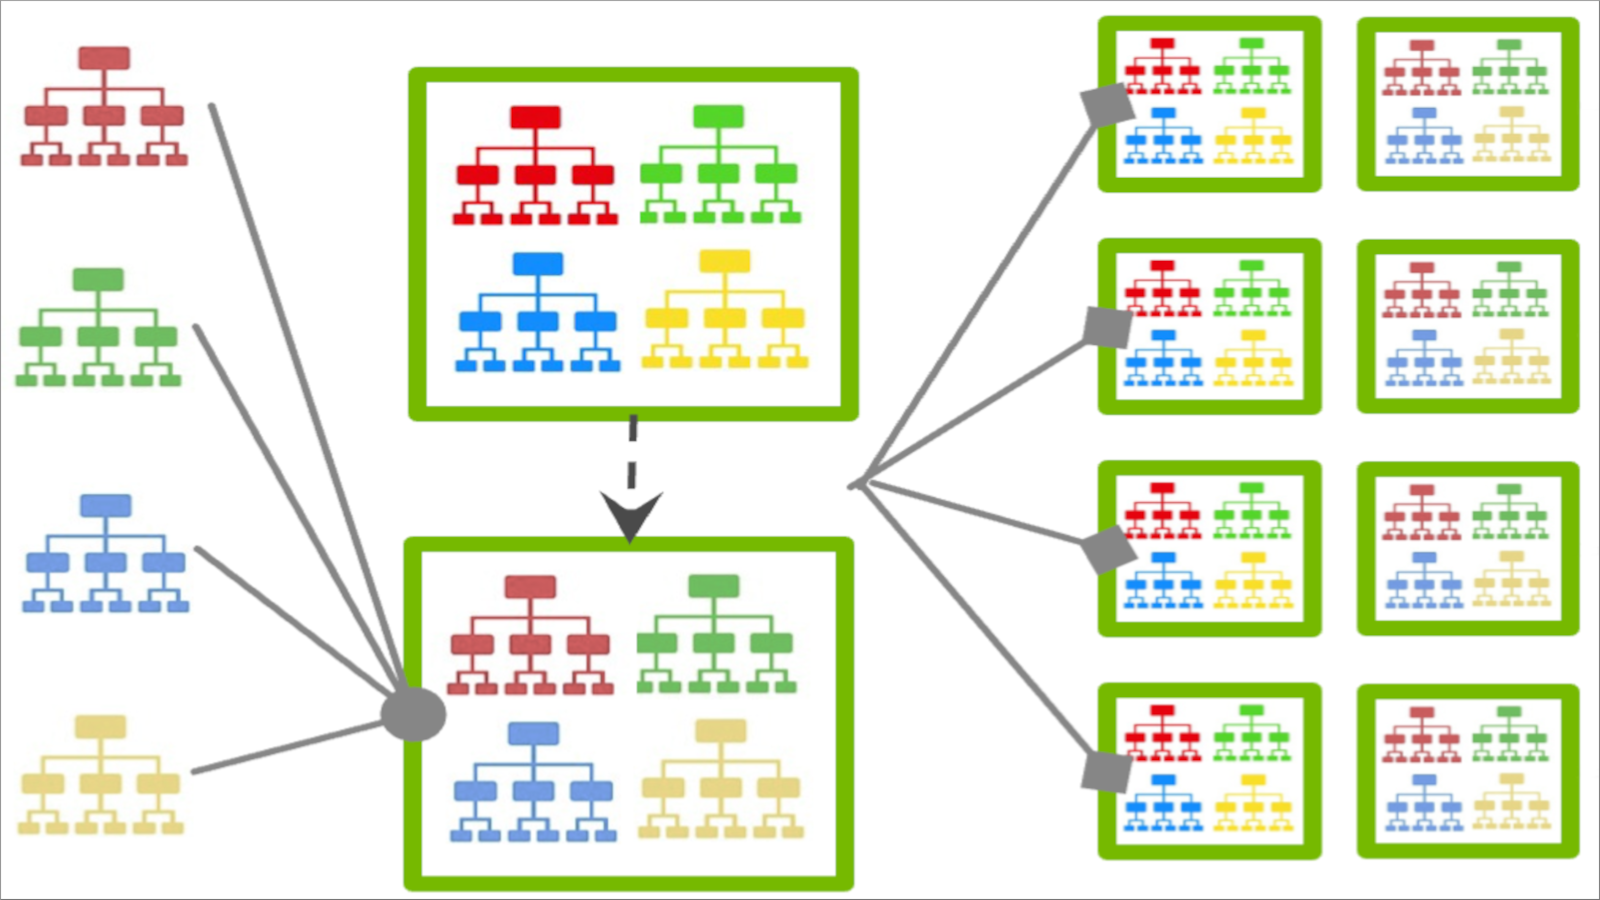 Hierarchical diagram shows how federated tree-based XGBoost aggregates a collection of trees, then redistributes to clients for further training.